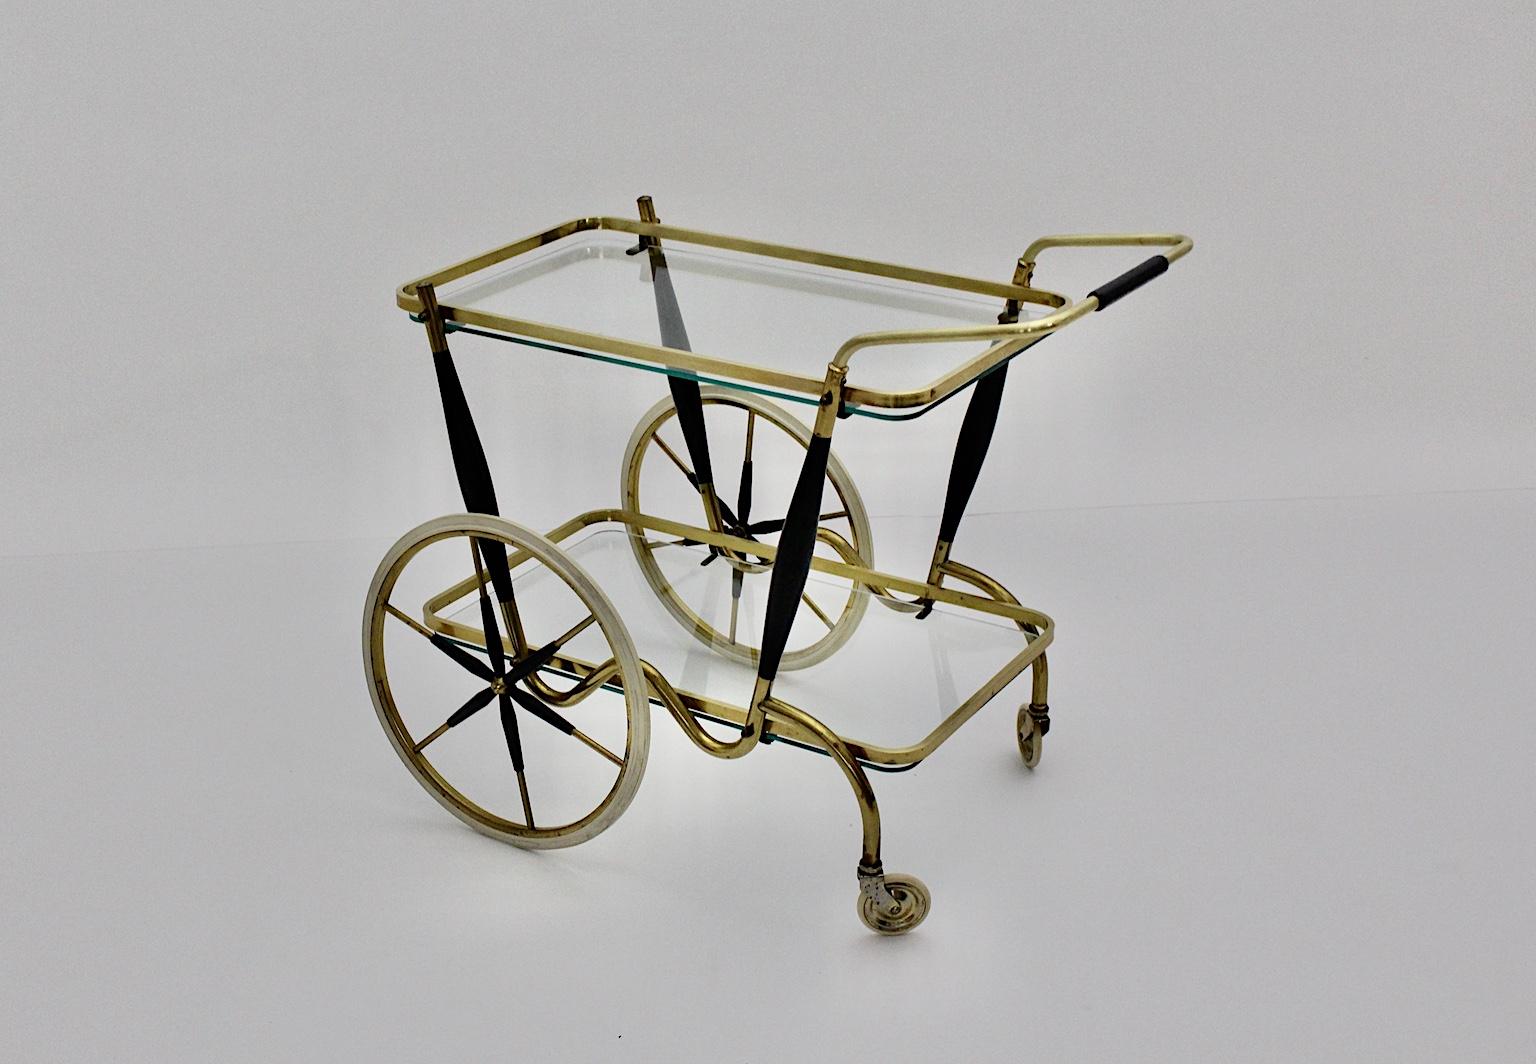 An elegant Mid-Century Modern two-tiered vintage brass cart, which was made out of brass and black lacquered beech.
The bar cart features two small white rubber framed wheels and also two high spoke white rubber wheels, while two clear glass plates